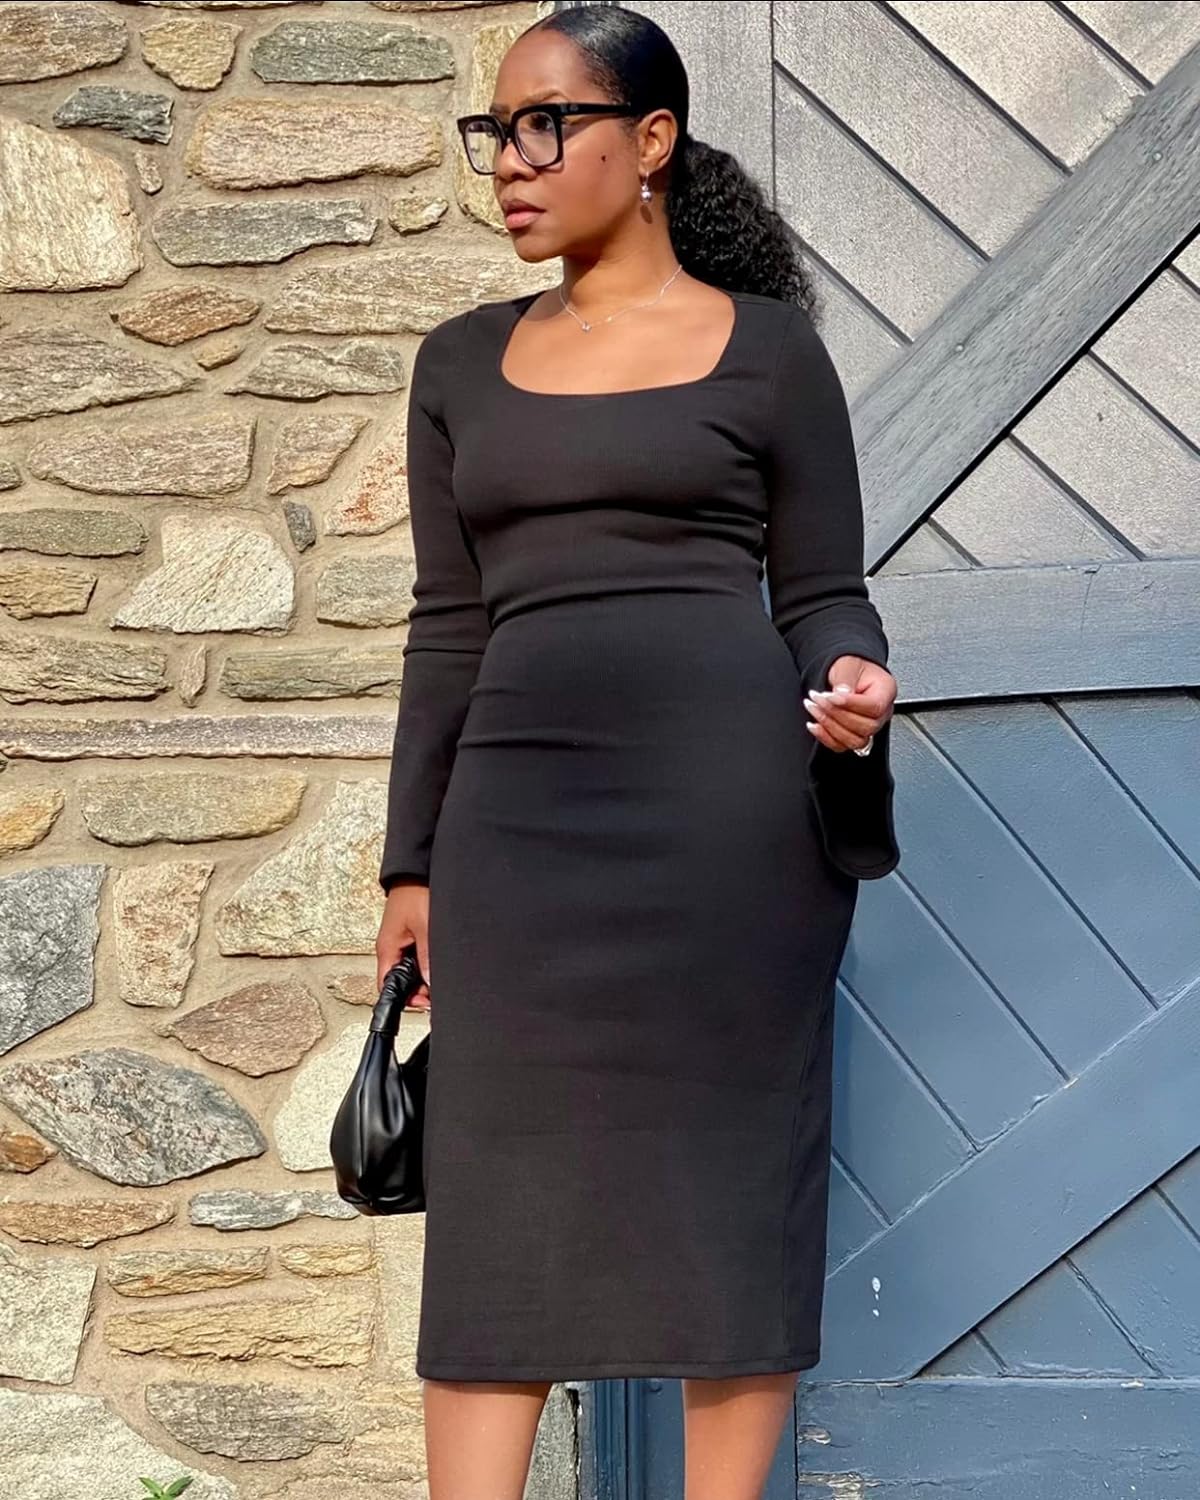 The Drop Women' Black Square Neck Knit Dress by @bosslady_life_style